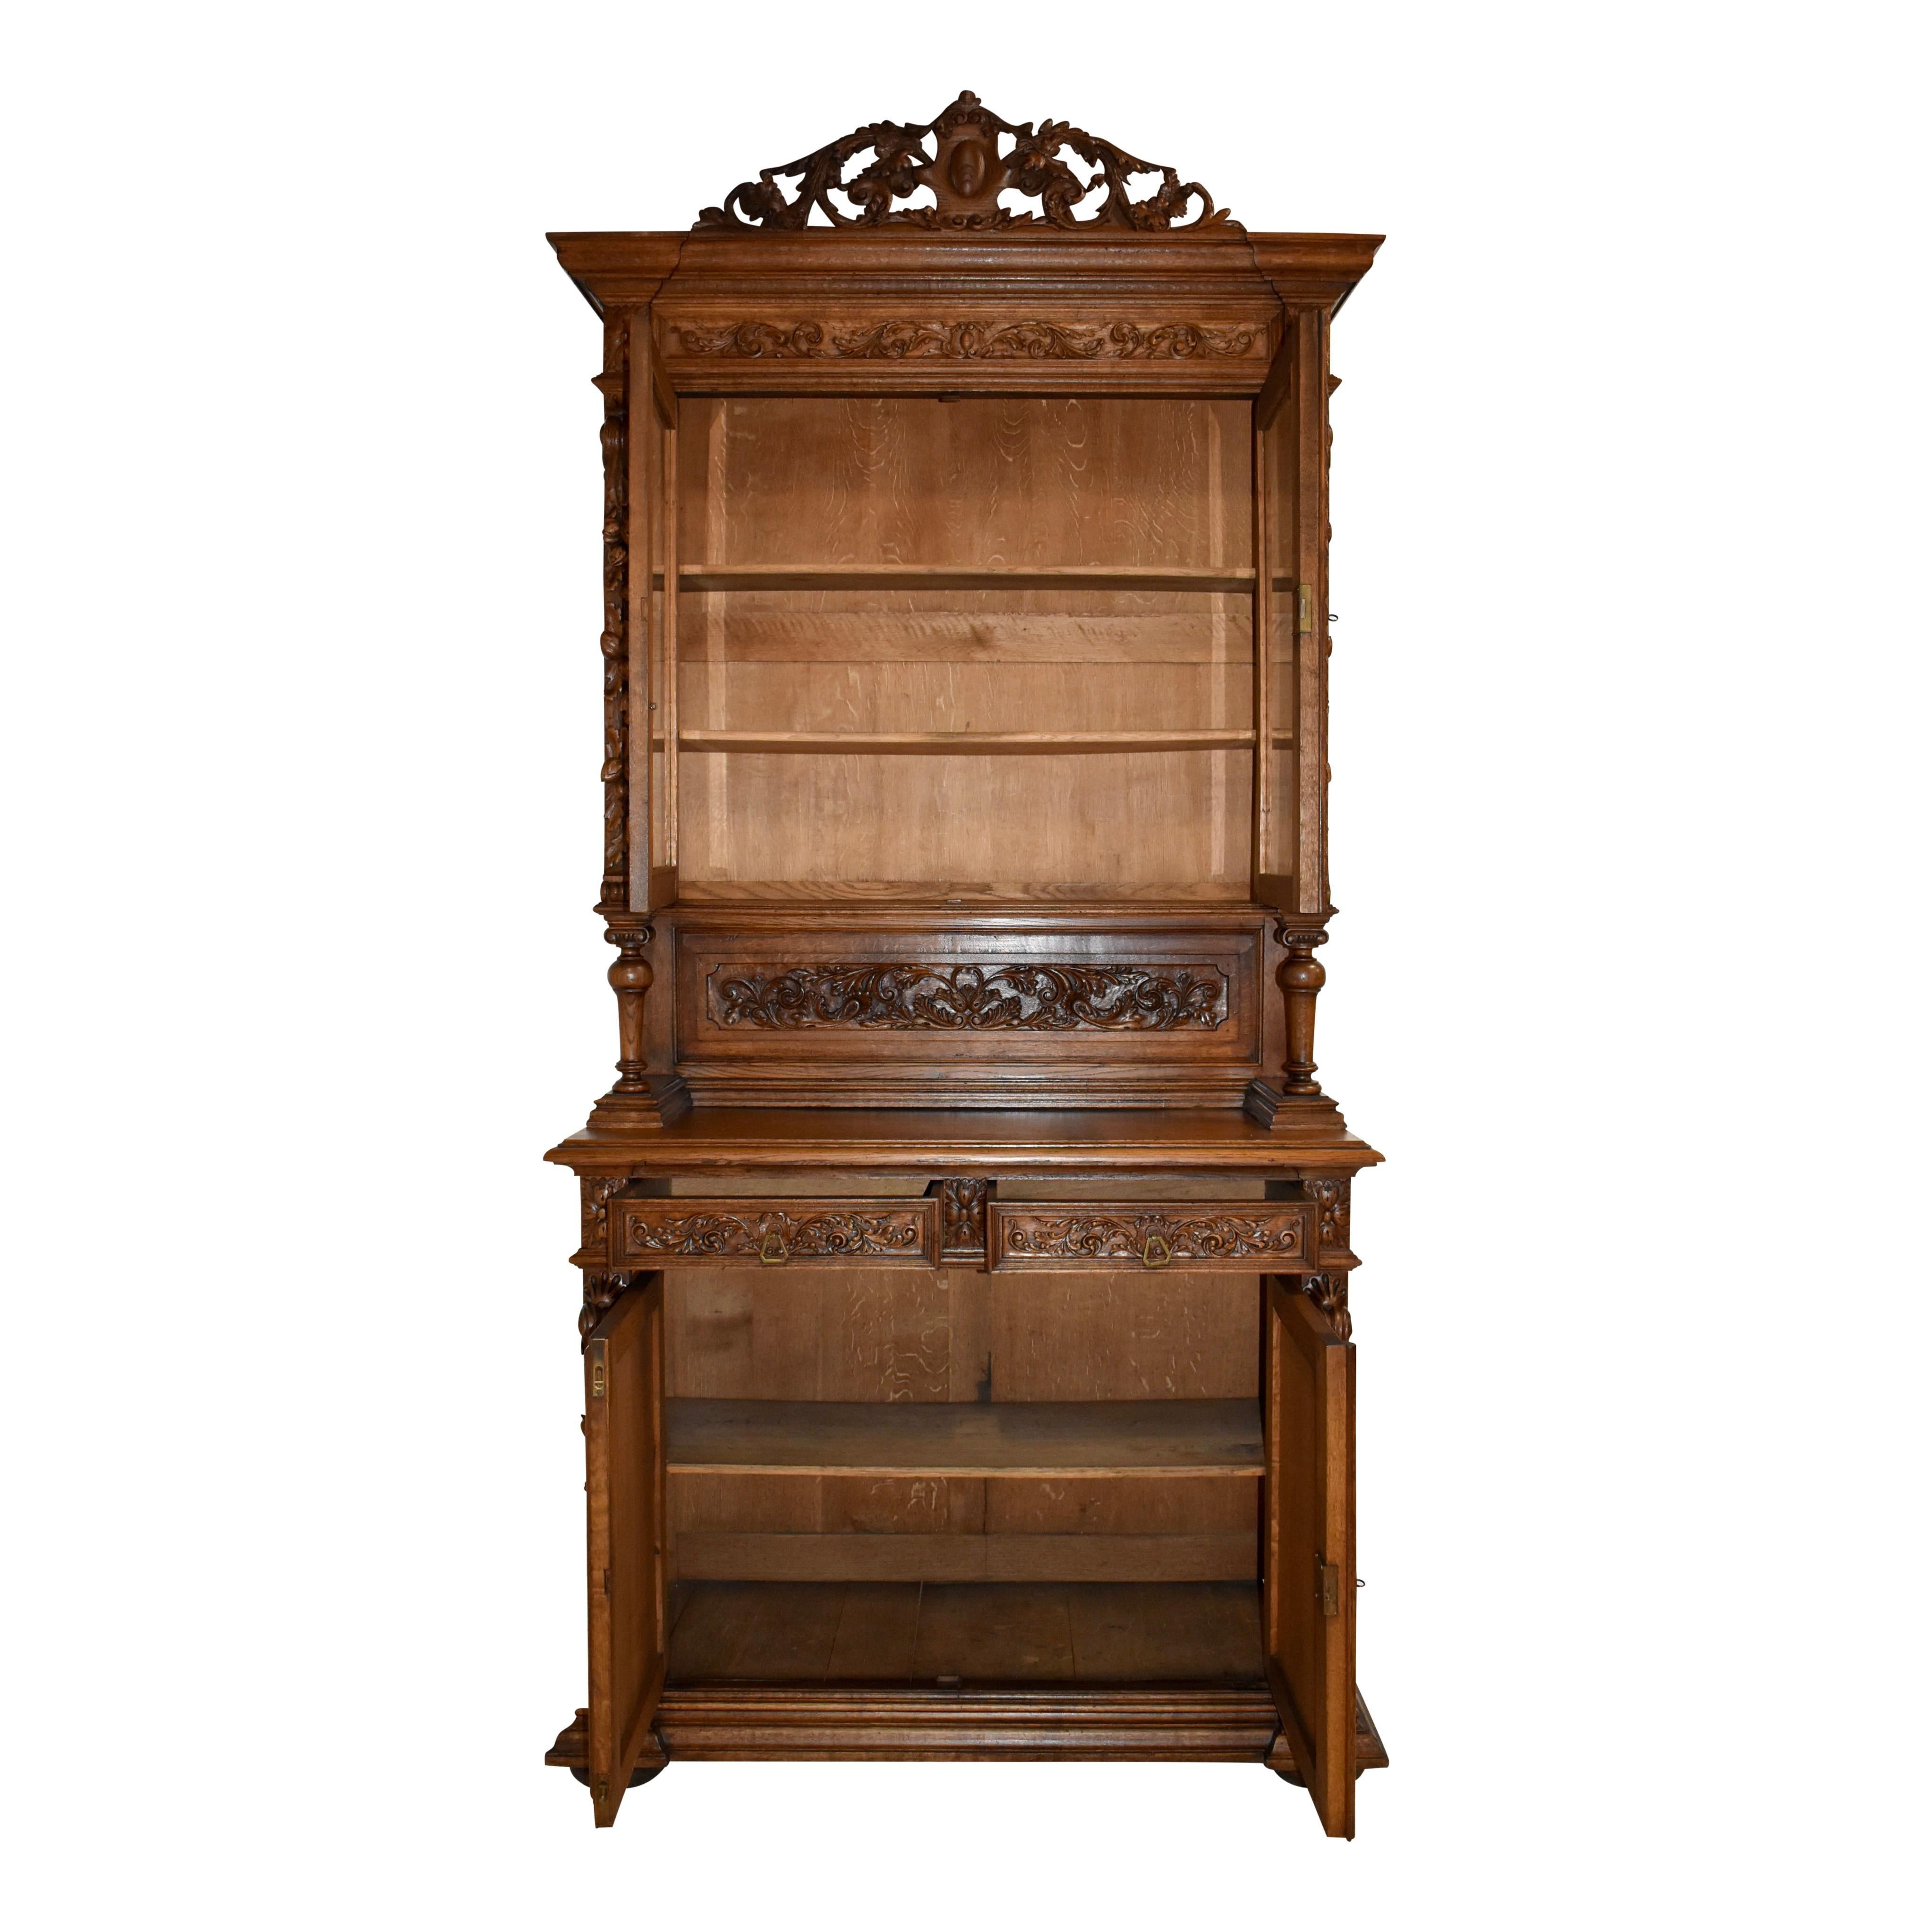 Substantial in size and beauty, this oak buffet is adorned with carvings from the hunt, scrolled foliage, flowers, and the fruit of the vine. It showcases a pierced crown of scrolled leaves with an oval medallion at the center, an upper cabinet with